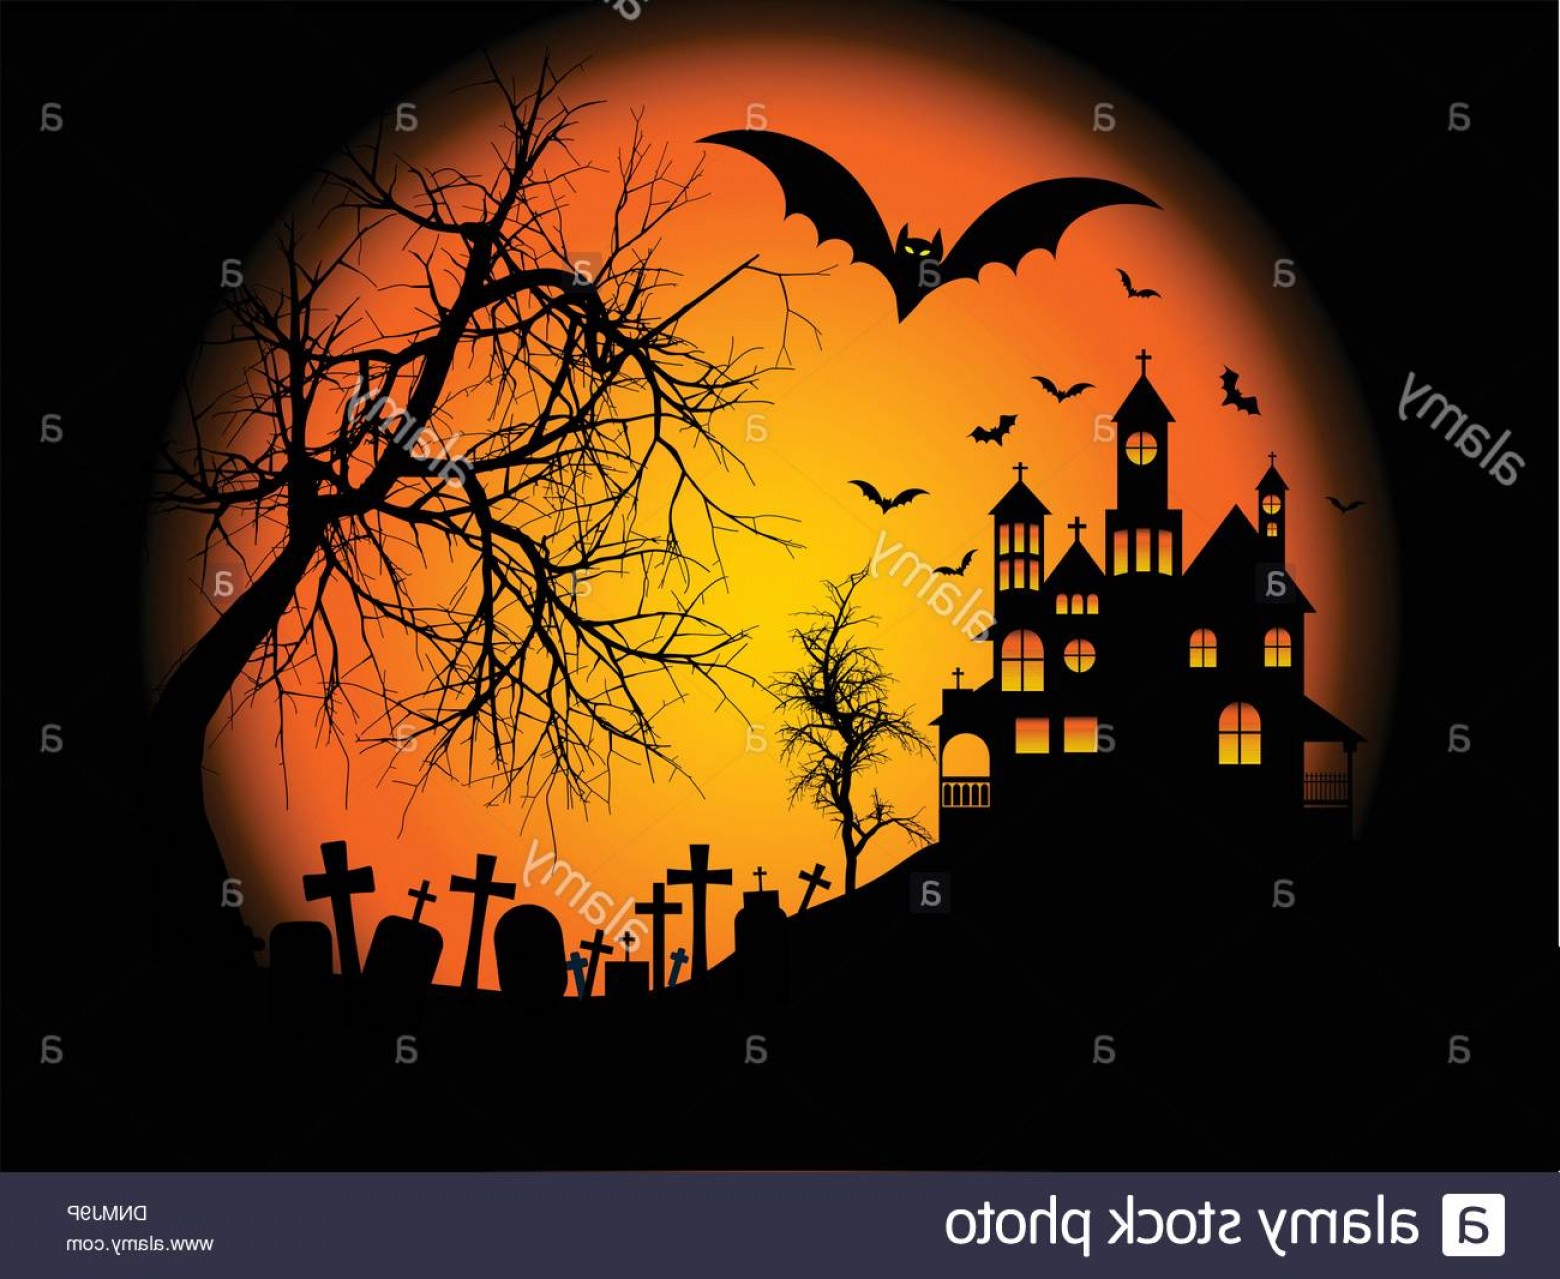 Spooky Halloween Background With Haunted House On A Hill Image